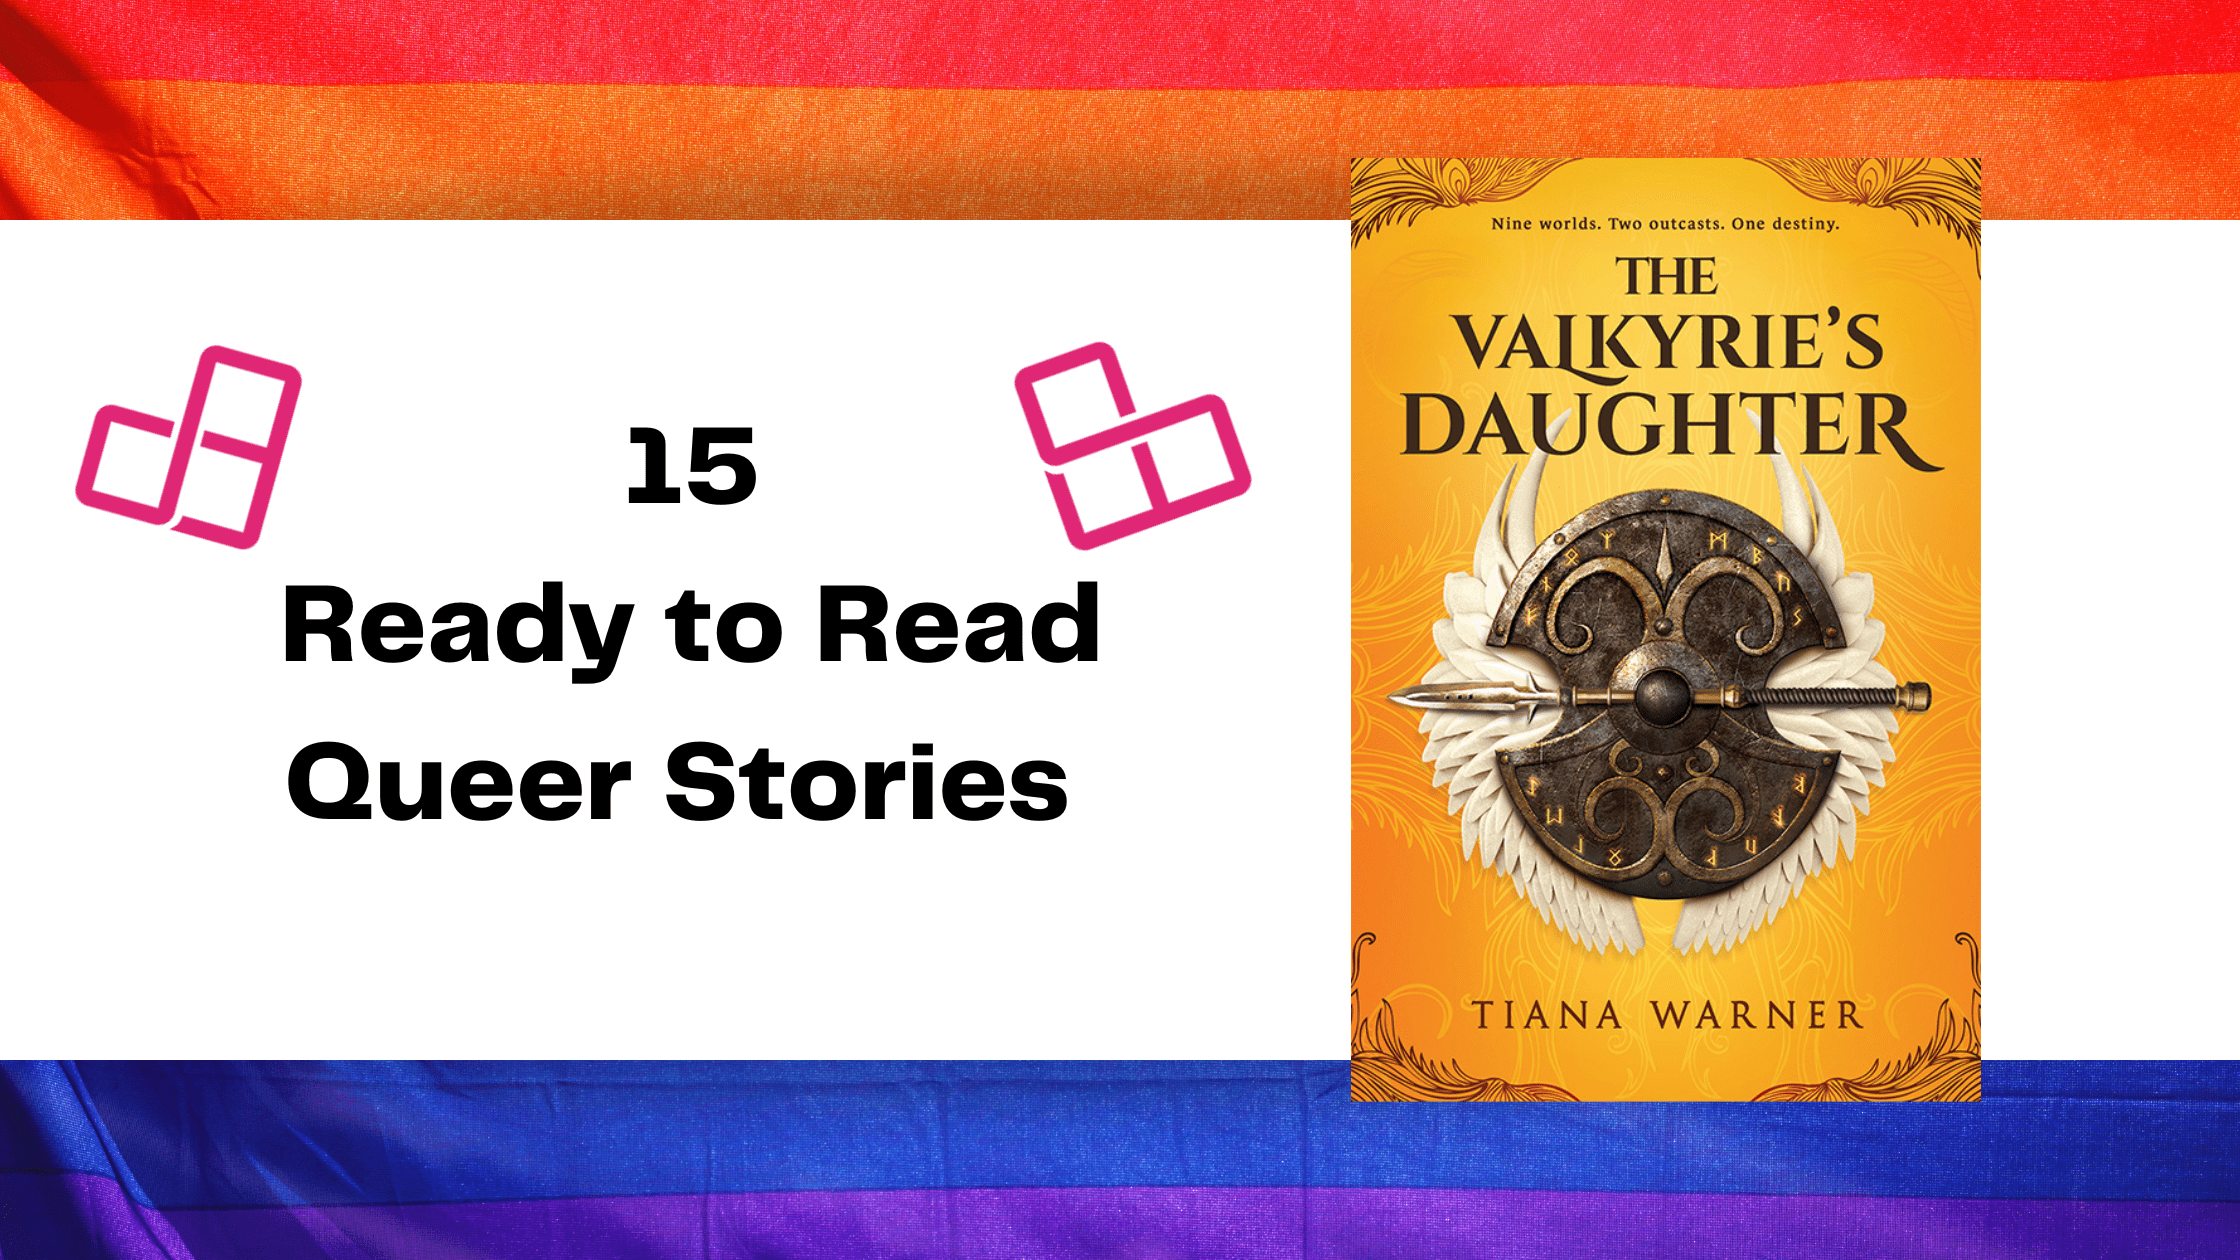 A gay pride flag. Over that is a white banner which reads "15 ready to read queer stories" with the Entangled Publishing hearts around it. Beside the text is the book cover for The Valkyrie's Daughter.